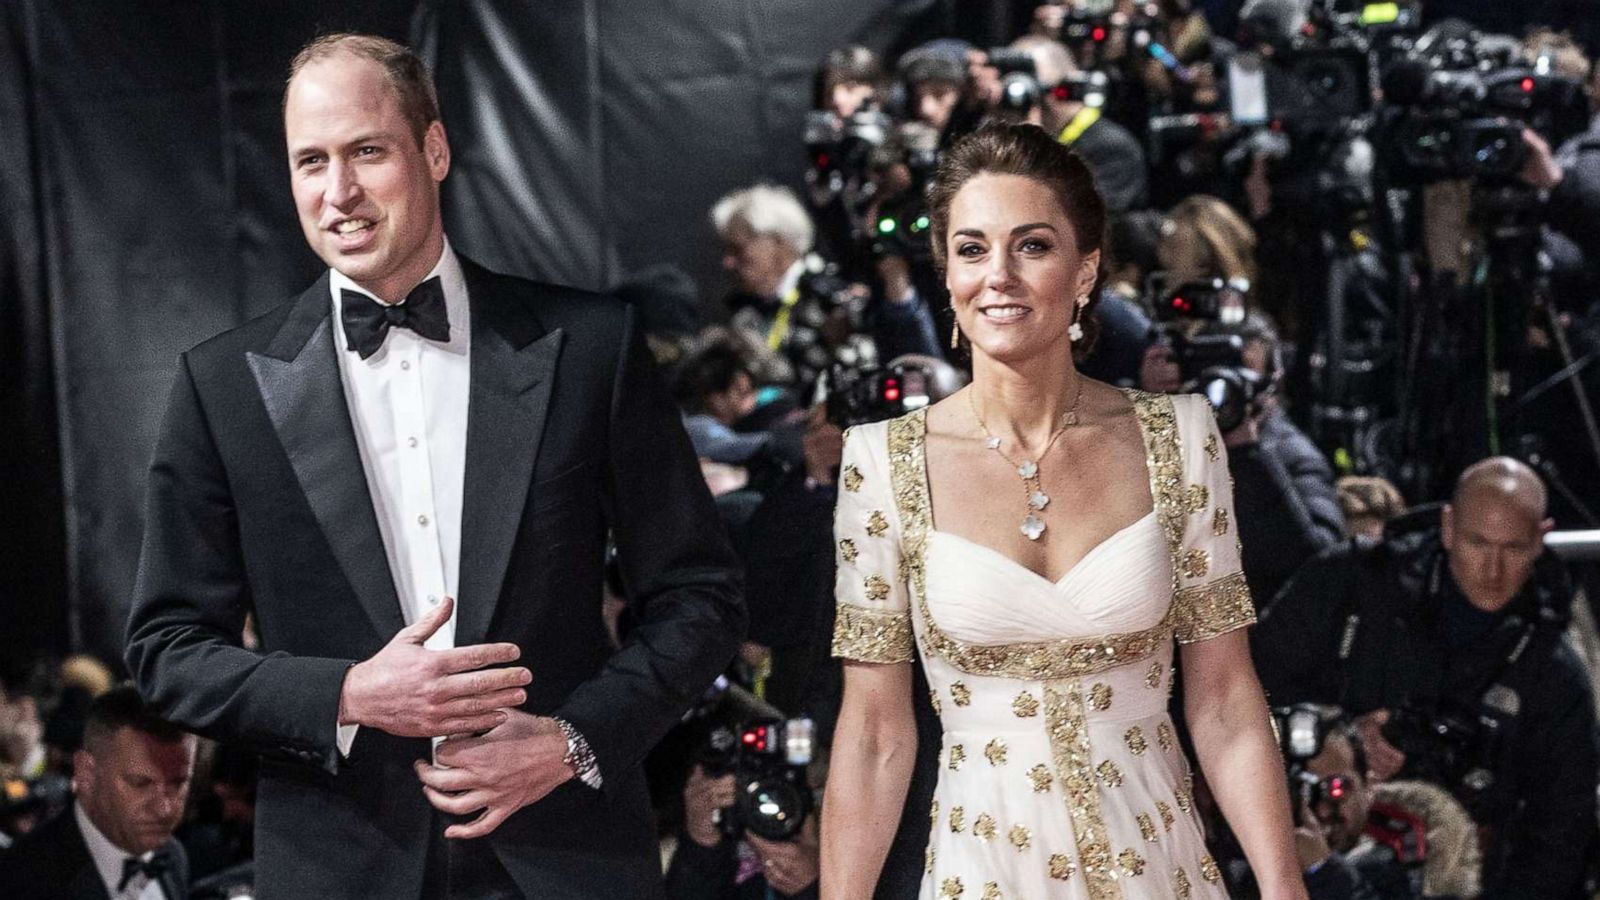 PHOTO: Prince William, Duke of Cambridge and Catherine, Duchess of Cambridge attend the EE British Academy Film Awards 2020, Feb. 2, 2020, in London.